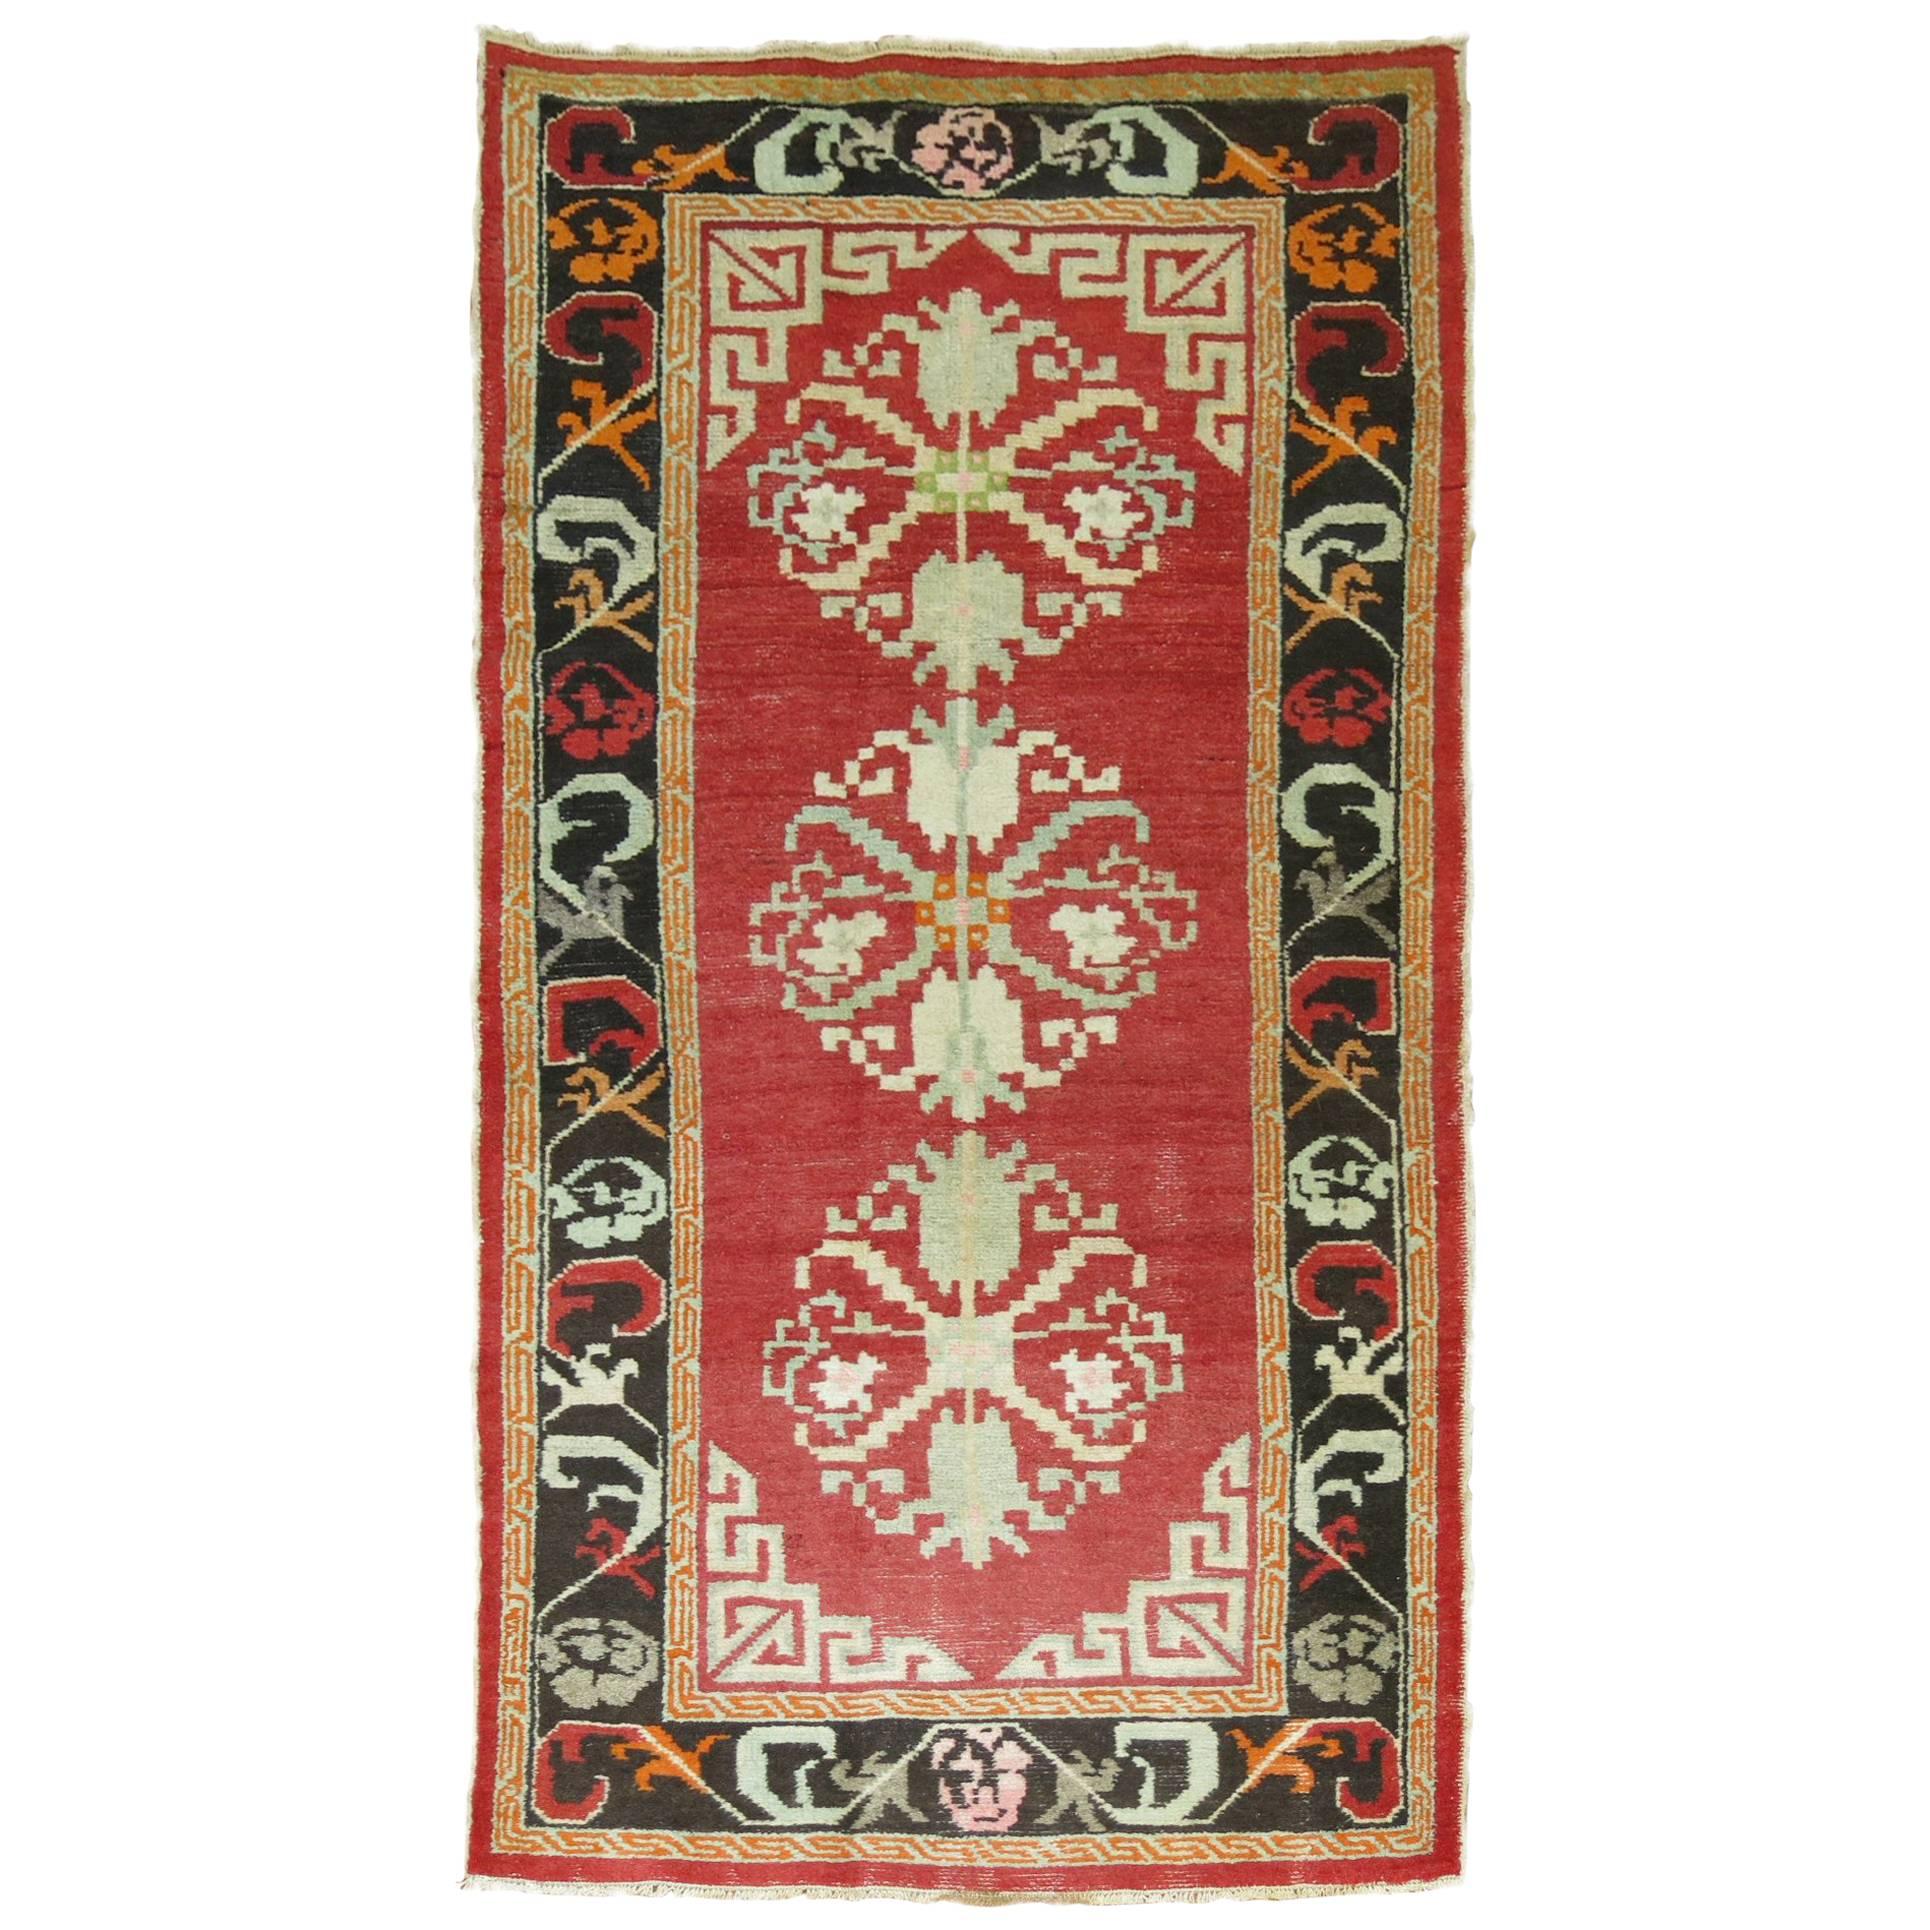 Vintage Turkish Rug influenced by Mongolian Style Rugs